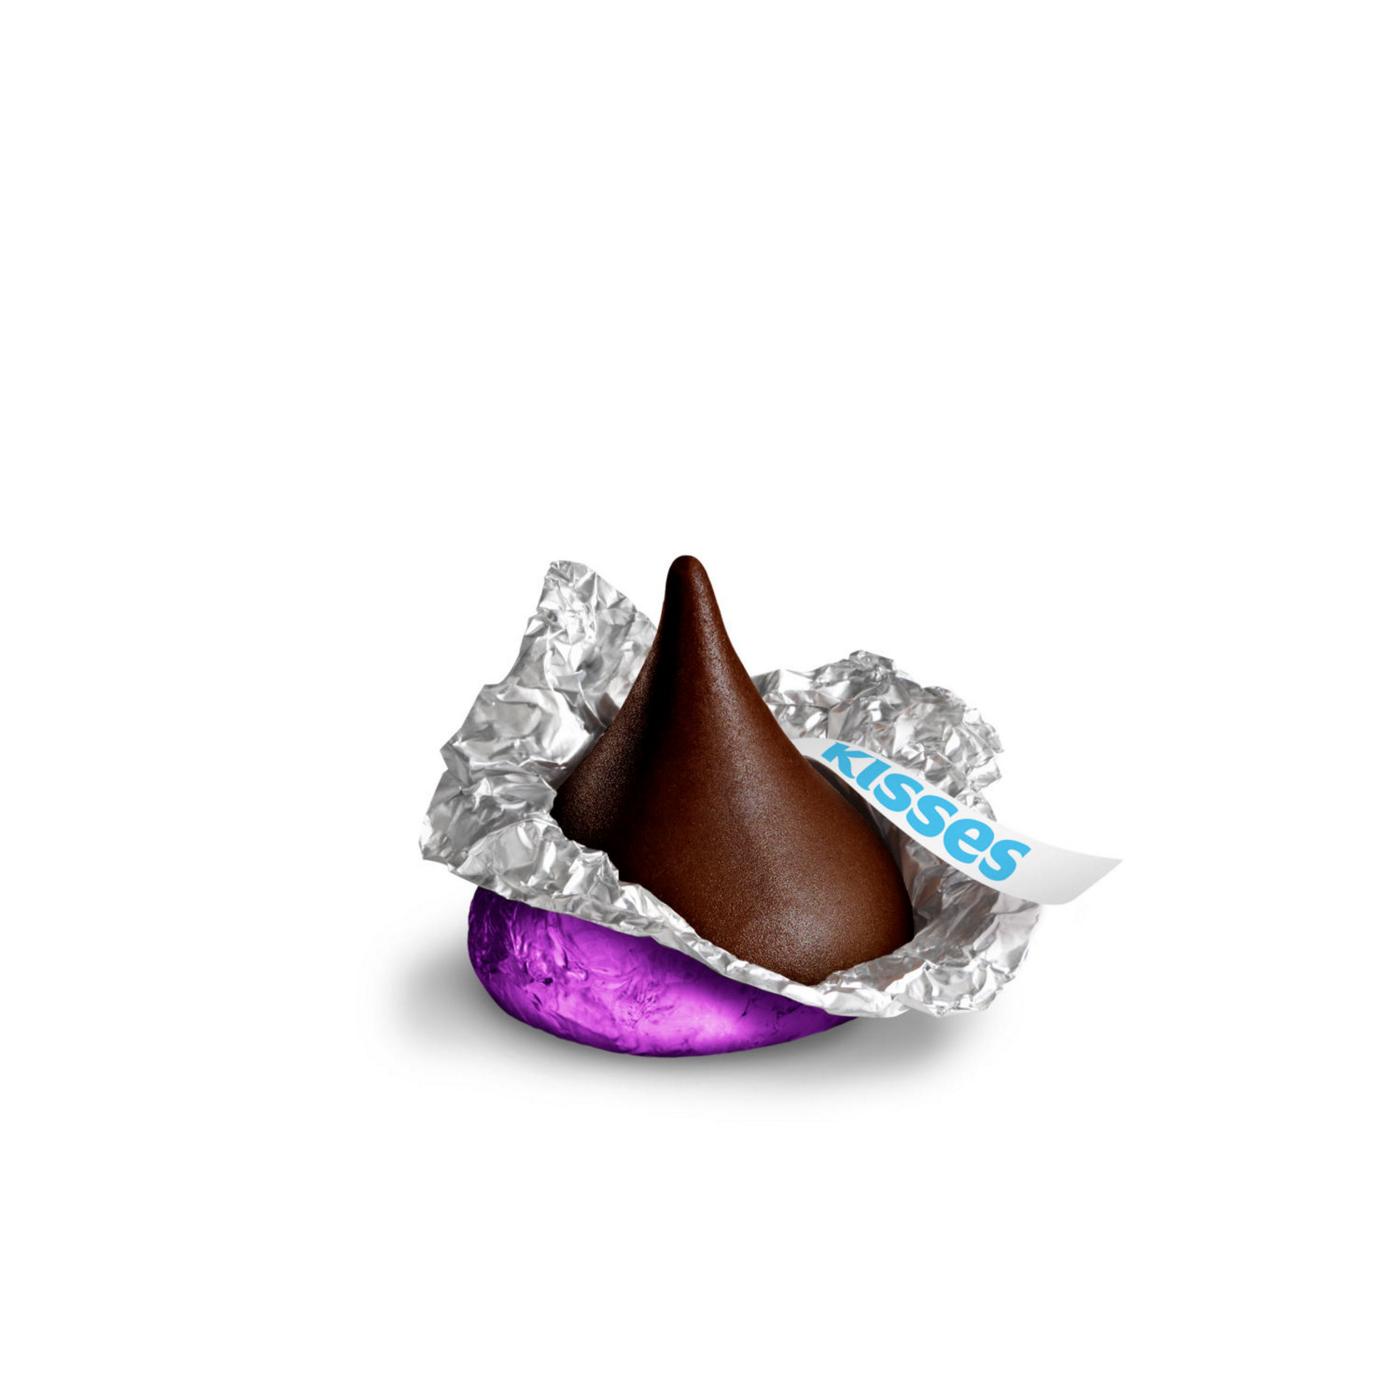 Hershey's Kisses Special Dark Mildly Sweet Chocolate Candy - Share Pack; image 3 of 6